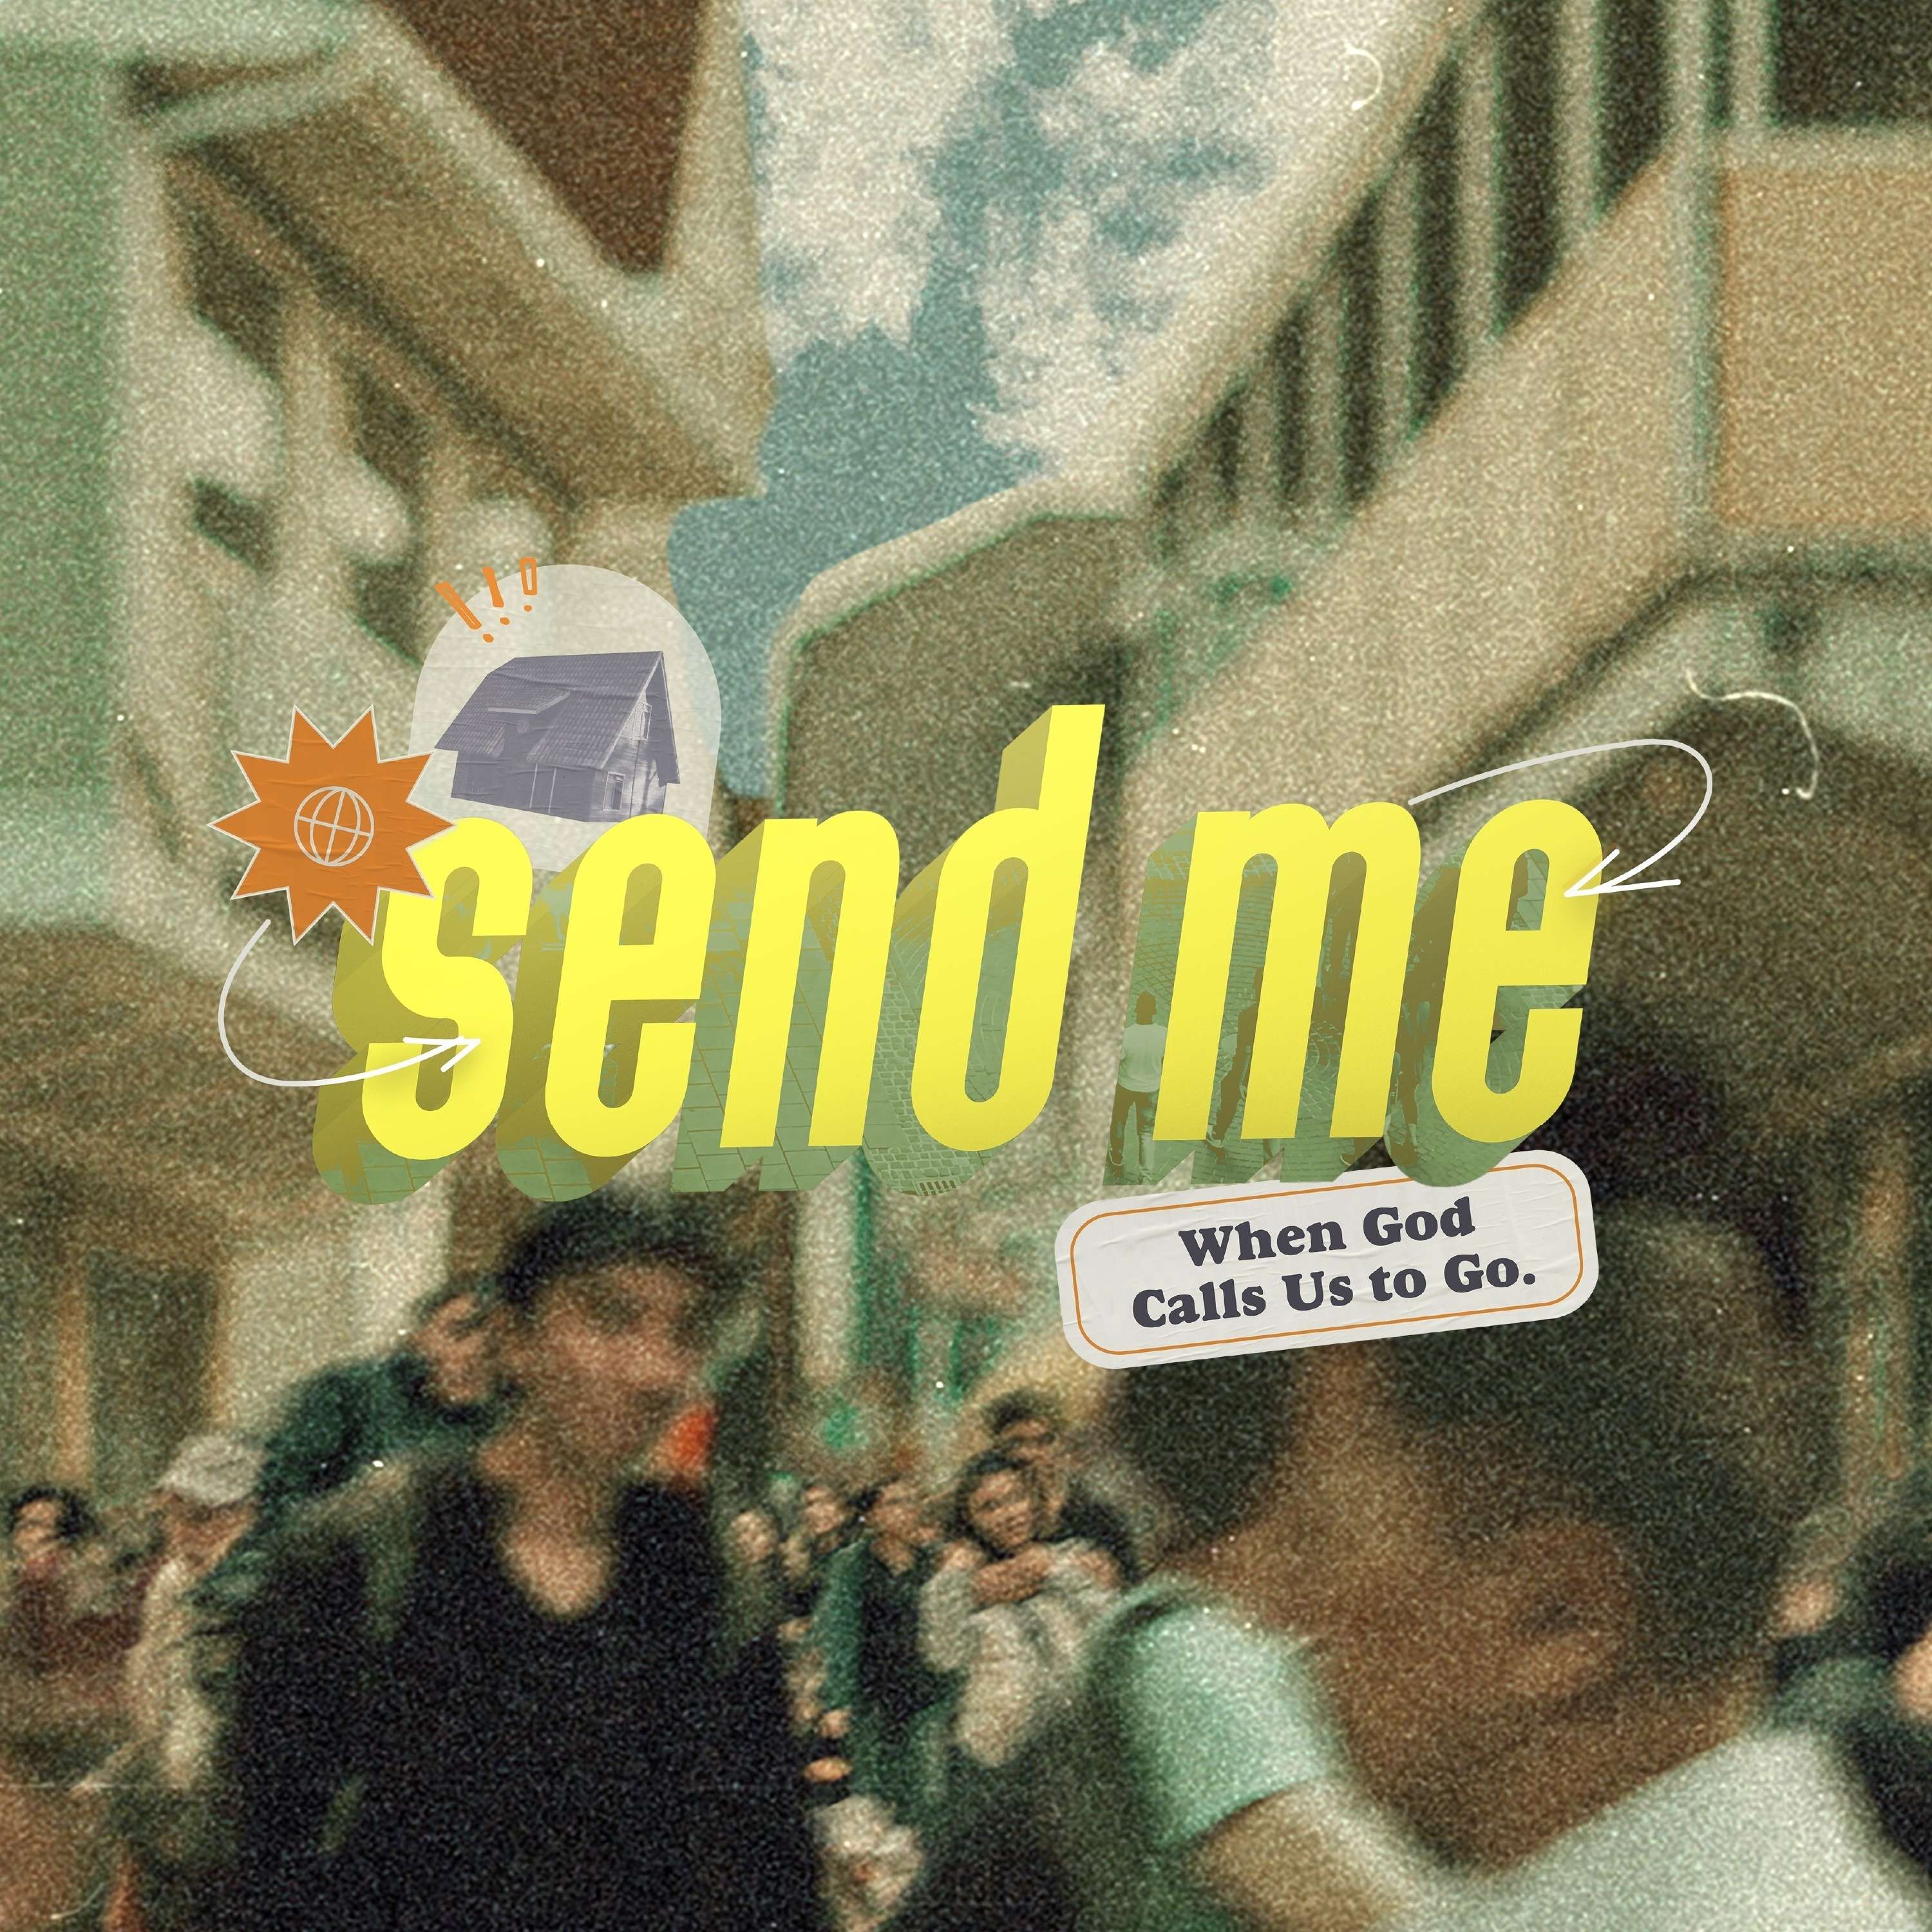 Send Me: Part 2 - Our Greatest Need